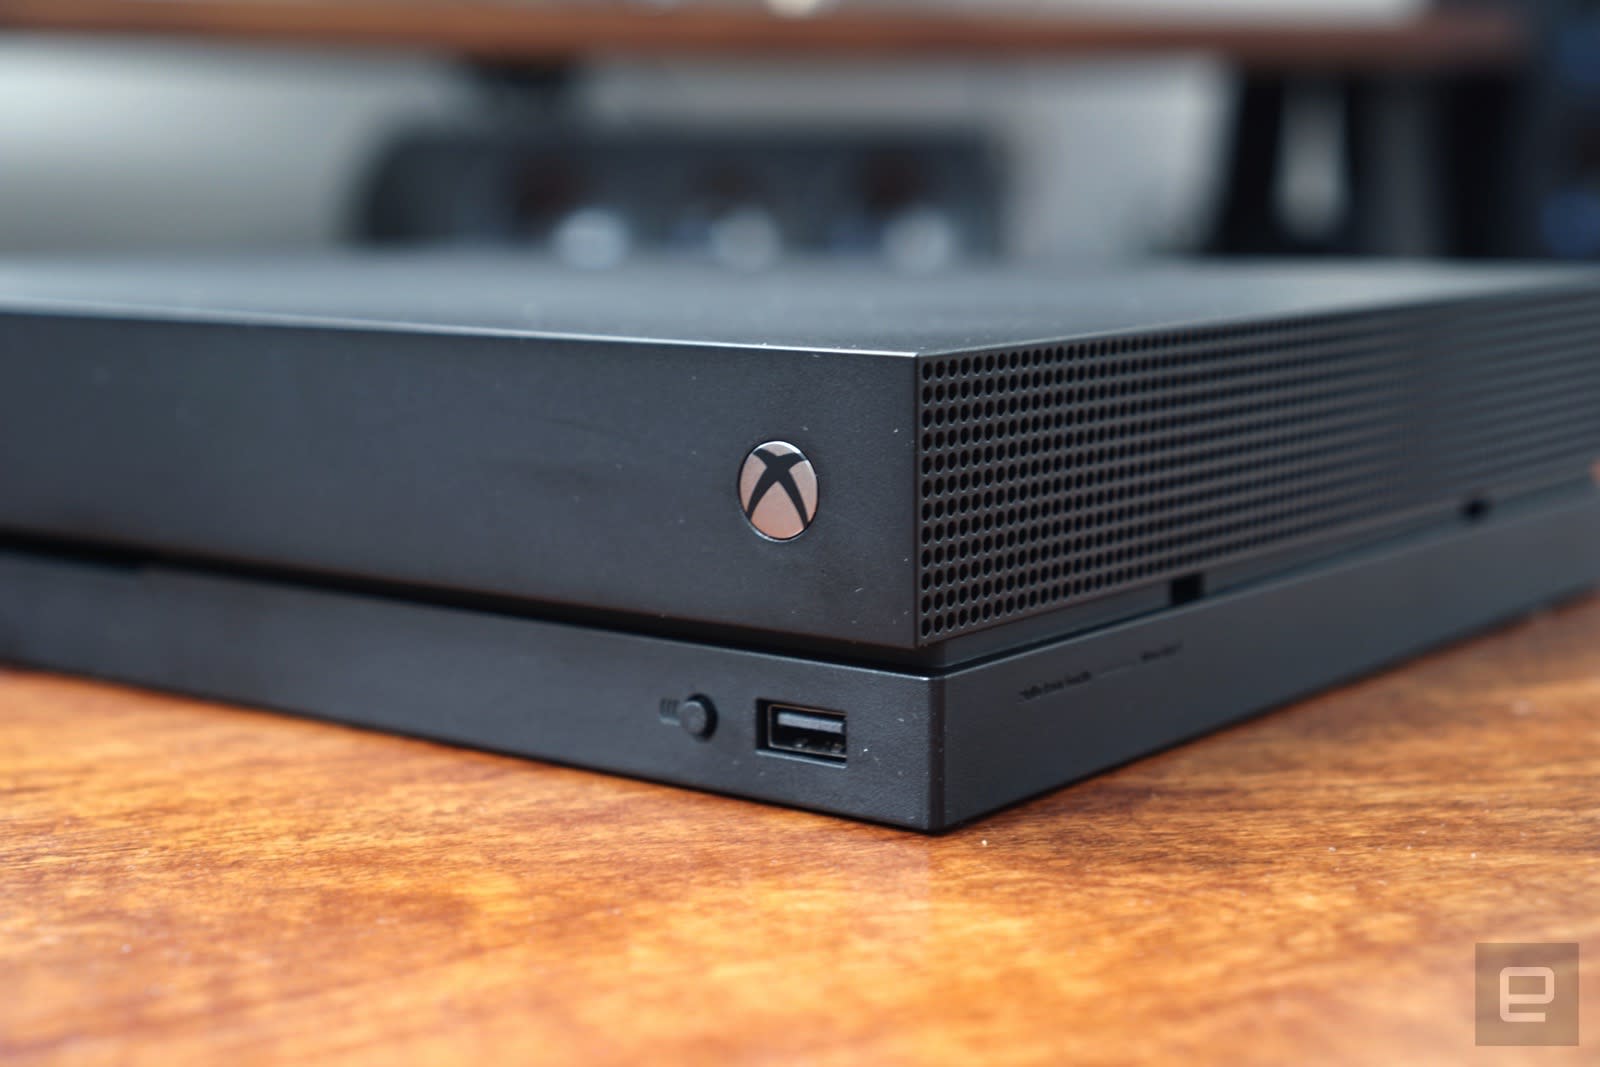 veel plezier Surrey Mijlpaal Xbox One X review: A console that keeps up with gaming PCs | Engadget